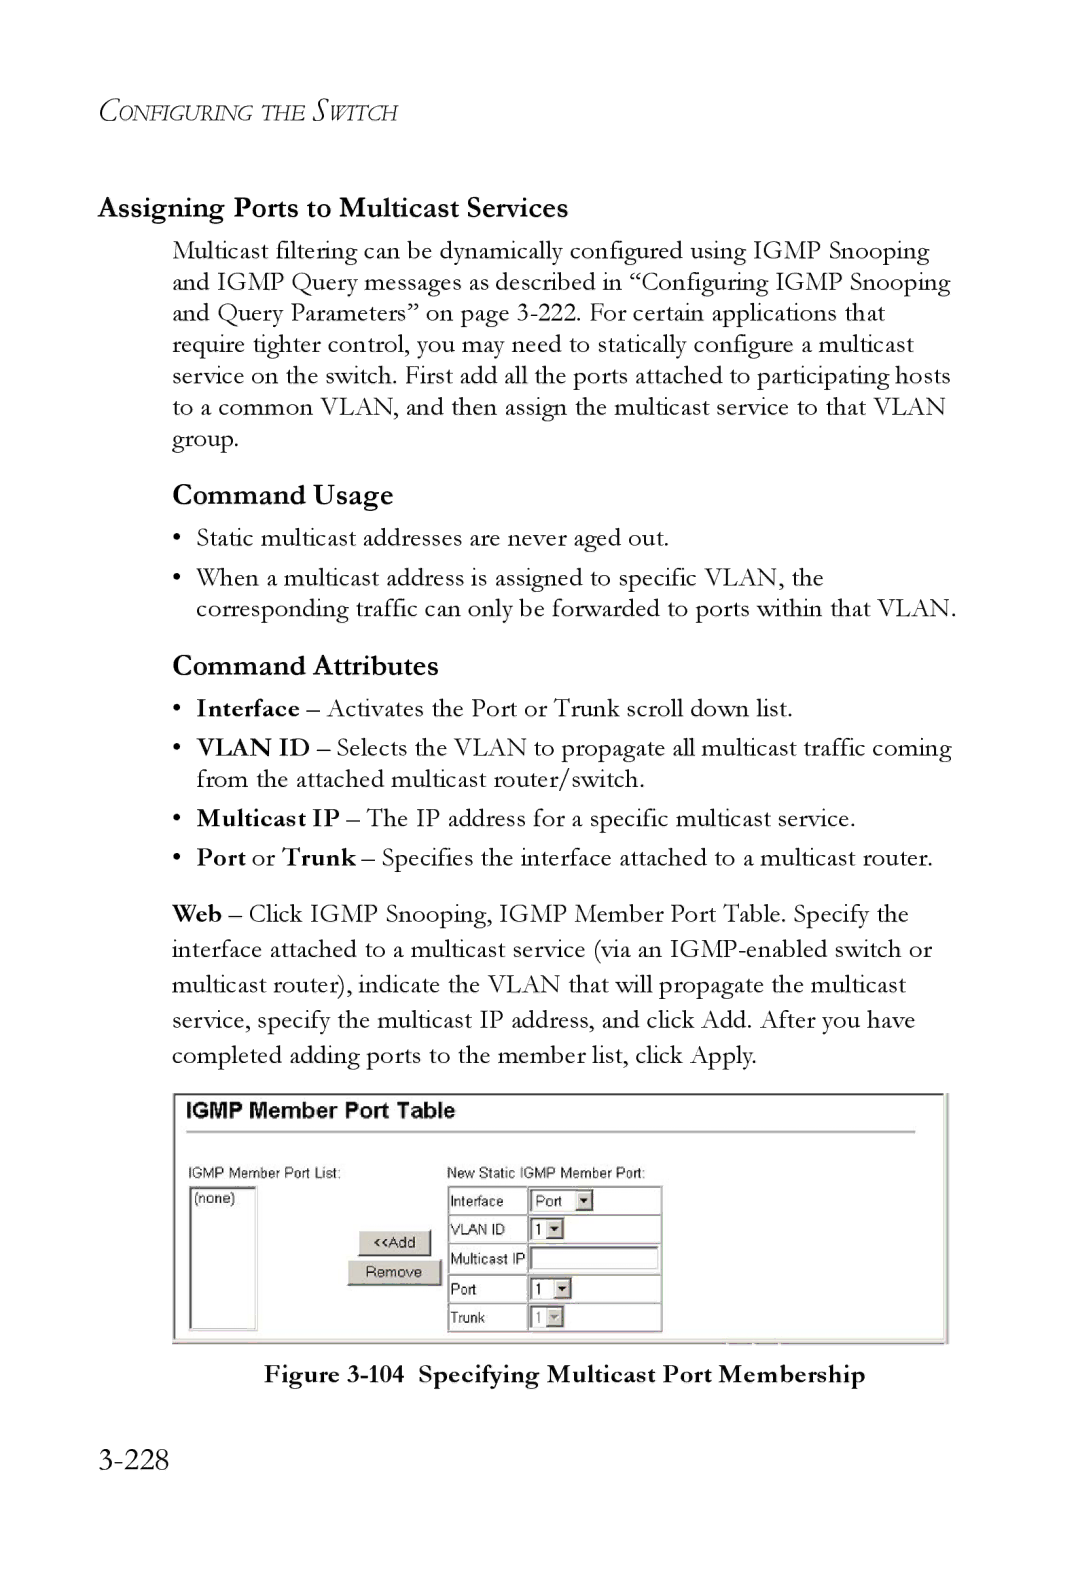 SMC Networks SMC6824M manual 228, Assigning Ports to Multicast Services 